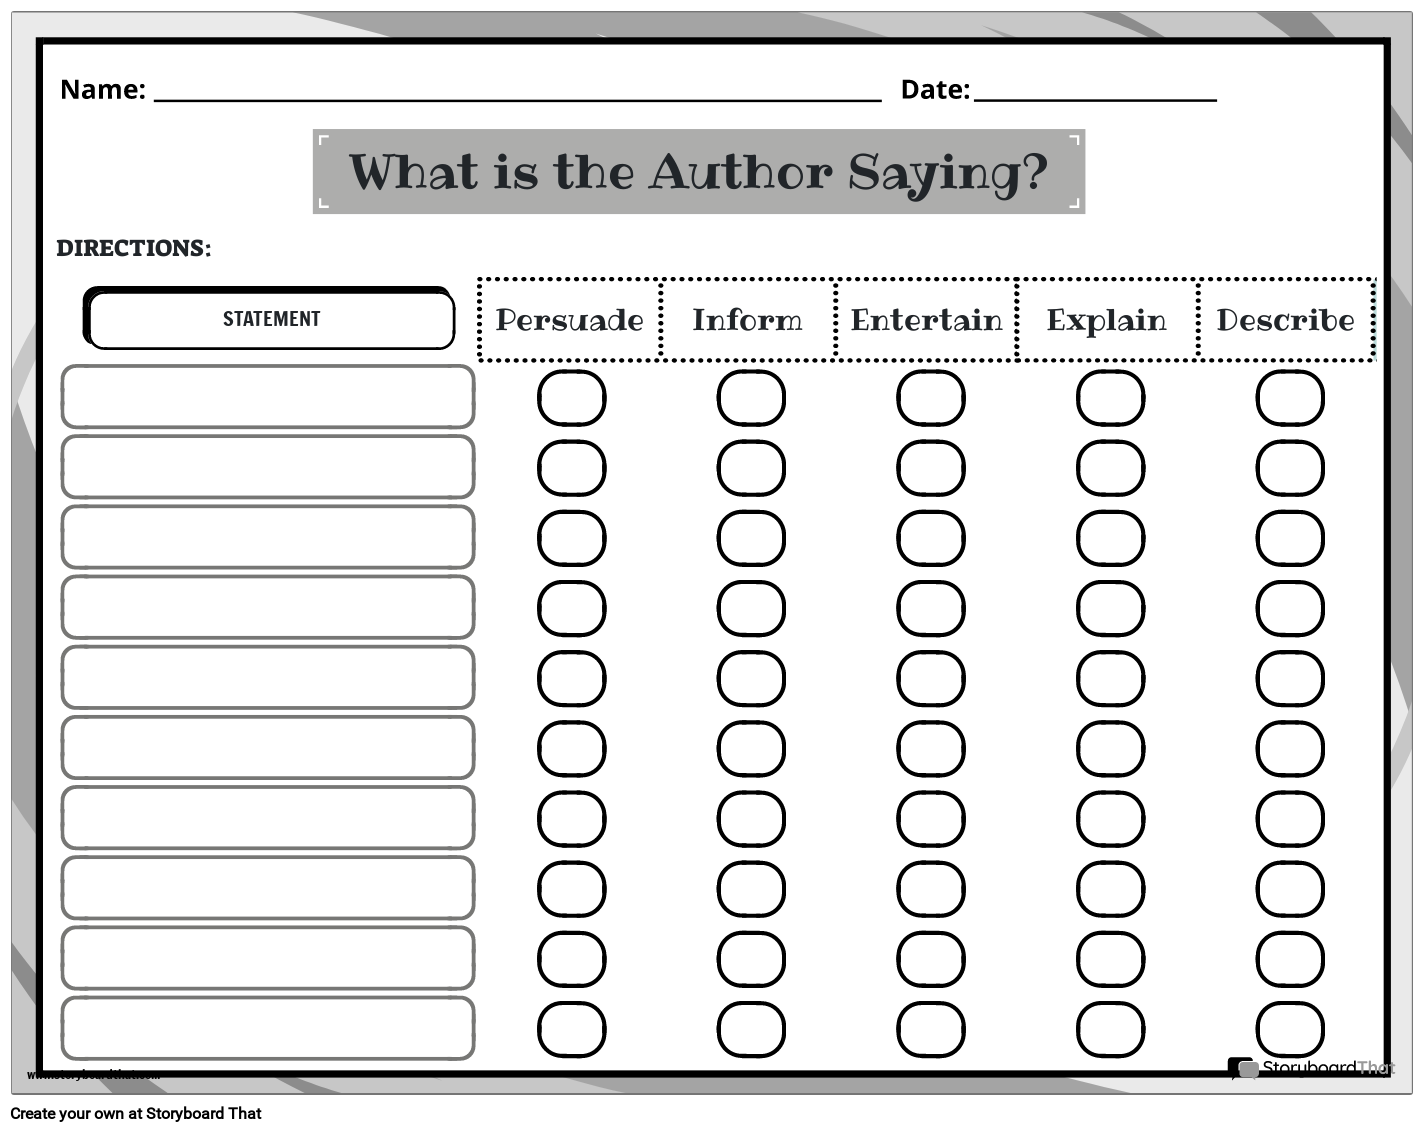 What's the Author is Saying - Author's Purpose Worksheet